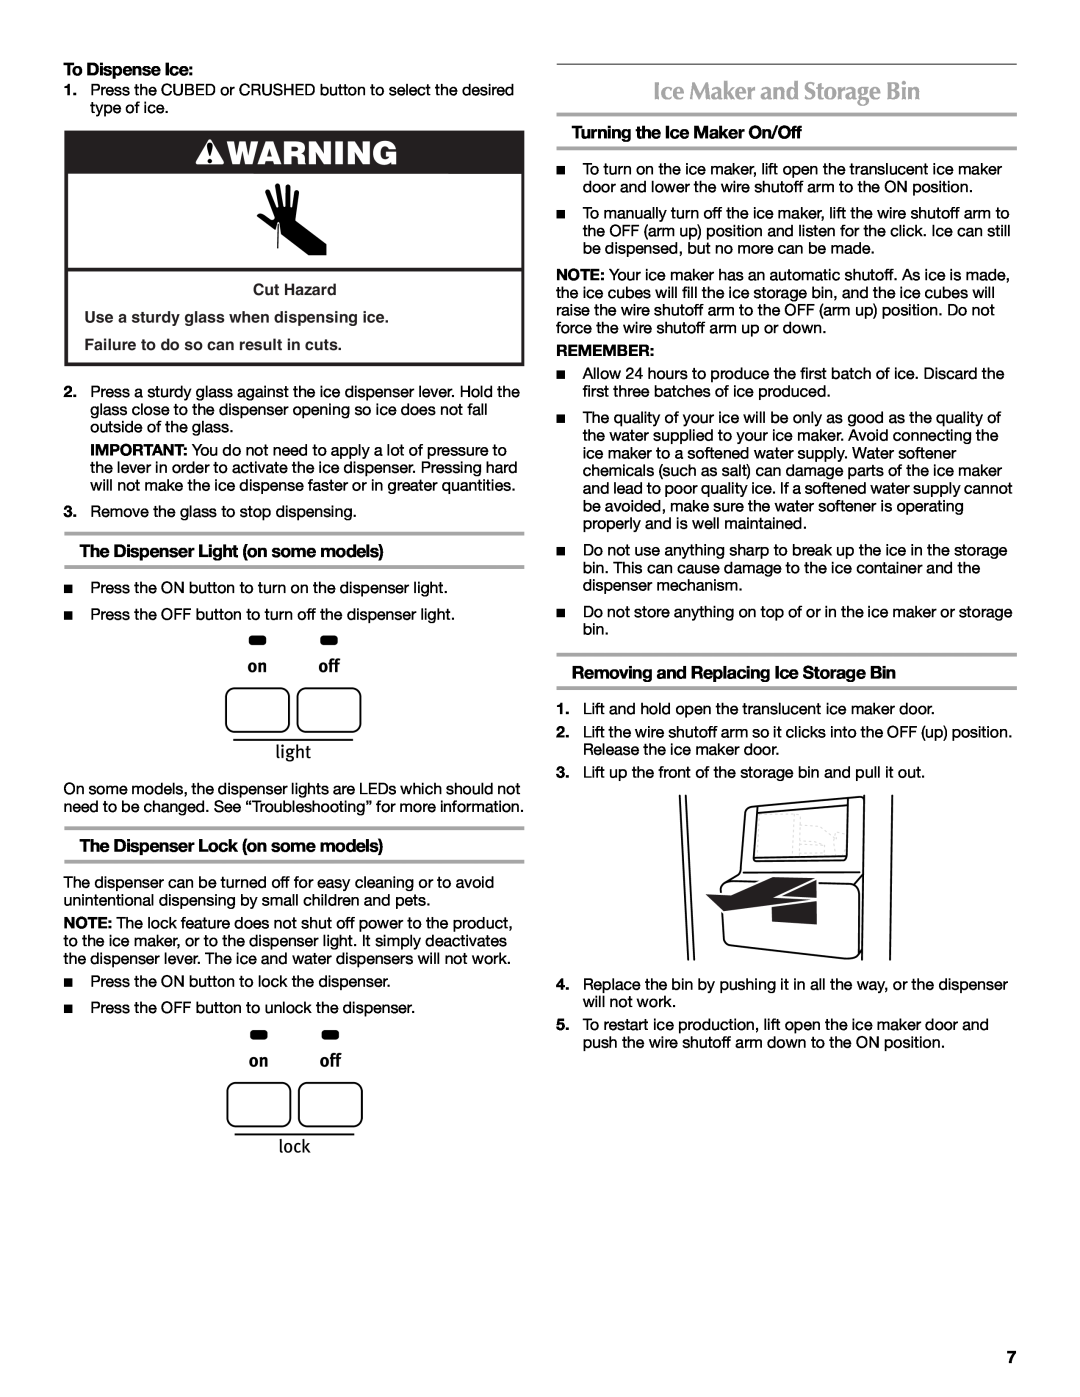 Maytag W10321478A installation instructions Ice Maker and Storage Bin, To Dispense Ice, The Dispenser Light on some models 